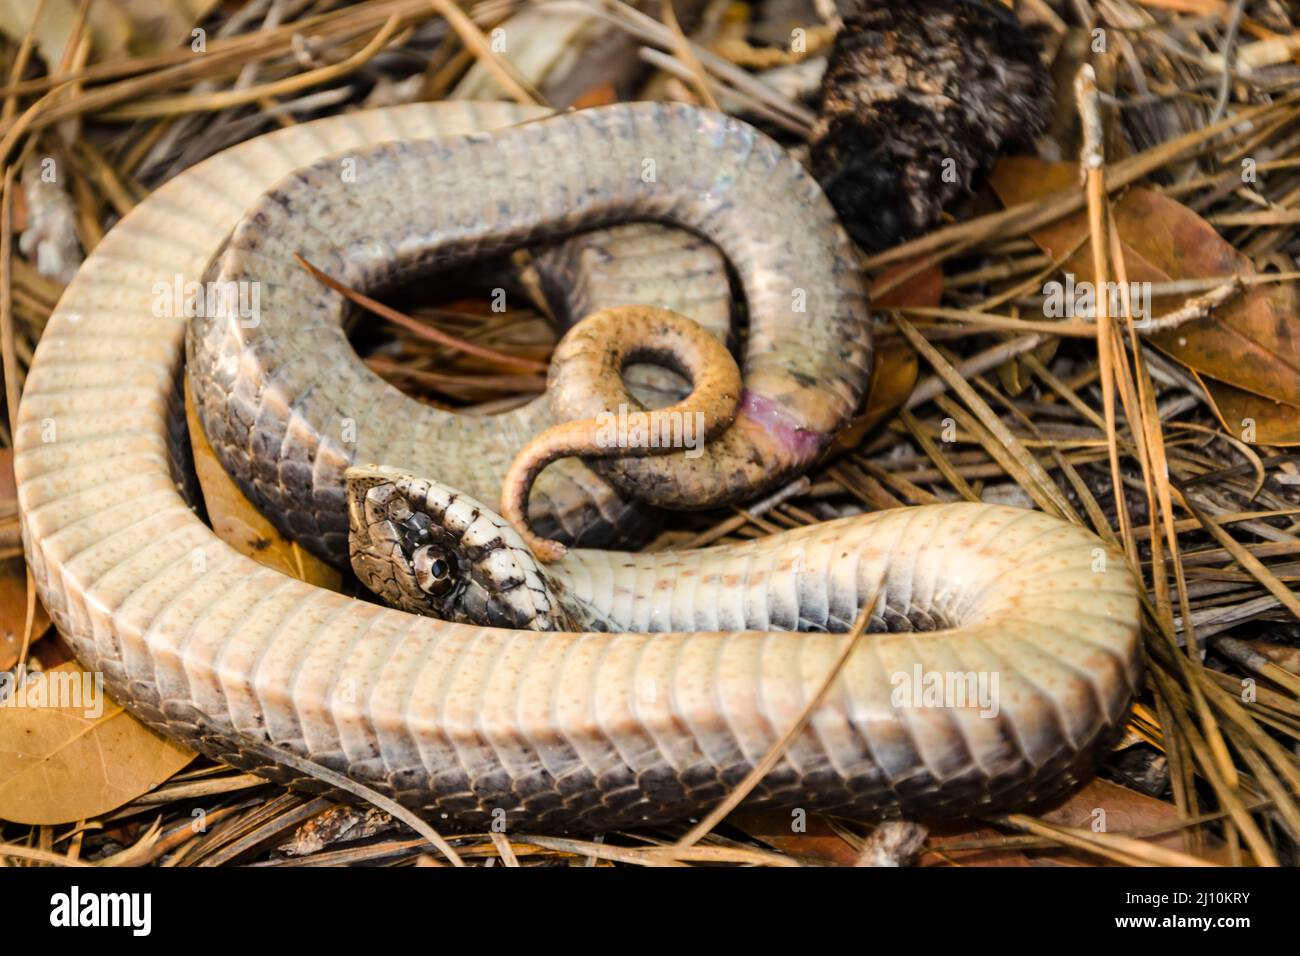 Video: Stubborn Hognose Snake Insists on Playing Dead